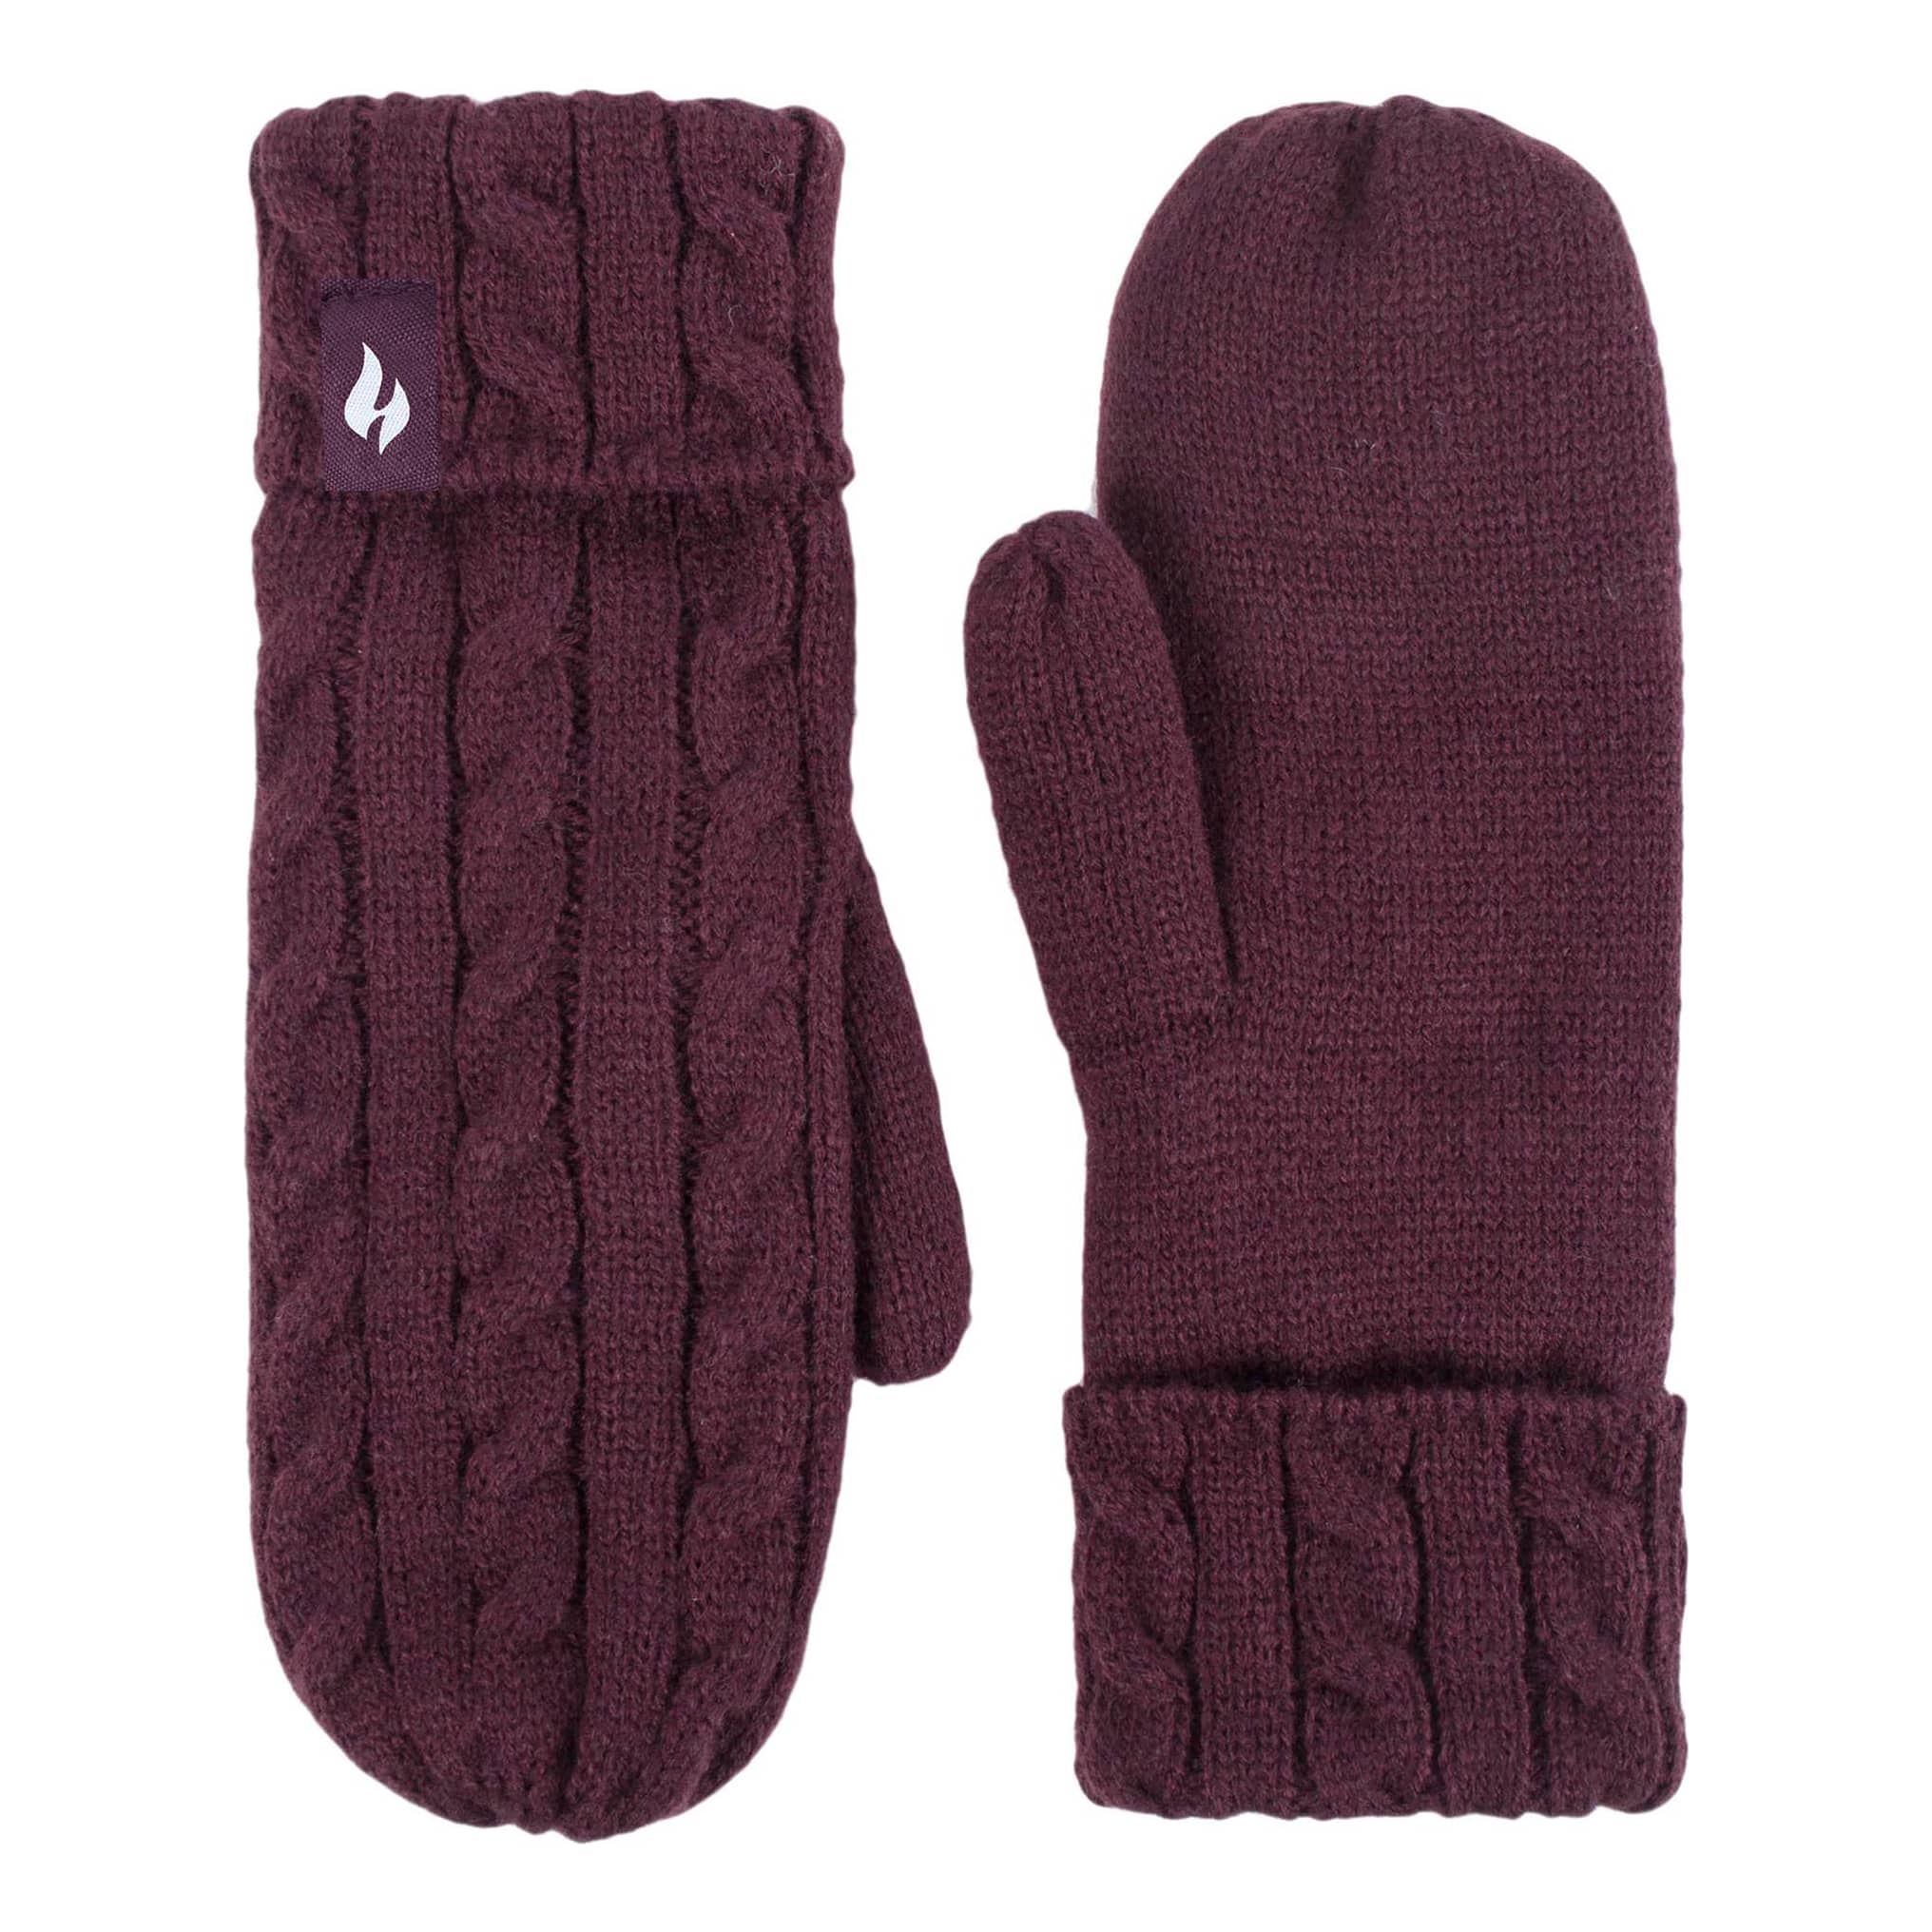 Heat Holders® Women’s Cable Knit Mittens - Deep Wine